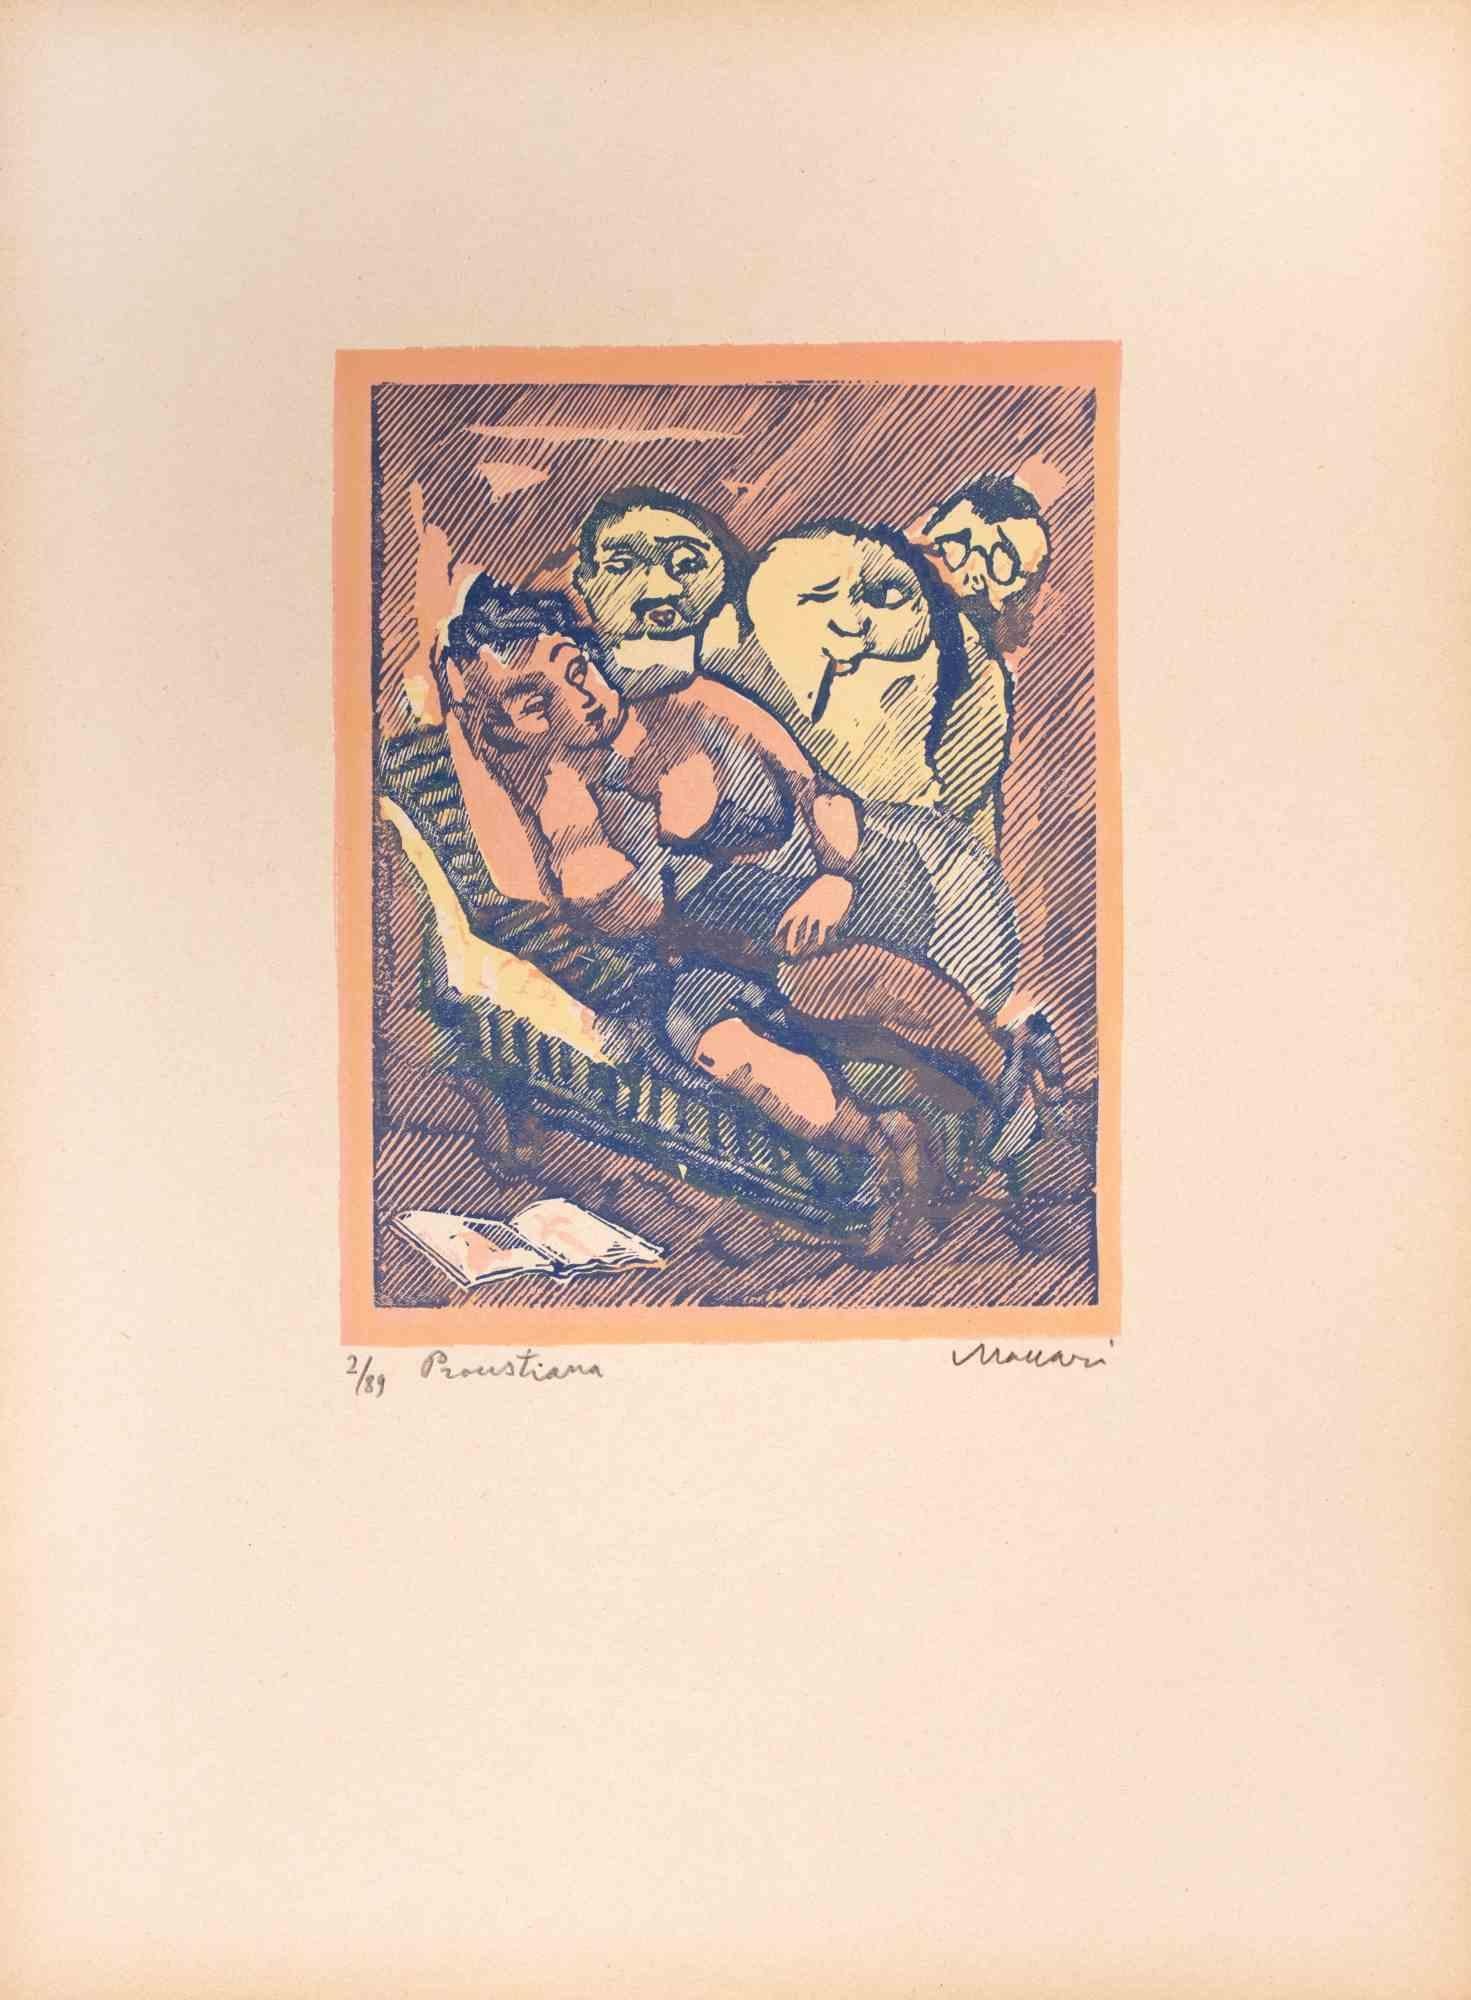 Proustian (Proustiana) is an Artwork realized by Mino Maccari  (1924-1989) in the Mid-20th Century.

Colored woodcut on paper. Hand-signed on the lower, numbered 2/89 specimens and titled on the left margin.

Good conditions.

Mino Maccari (Siena,